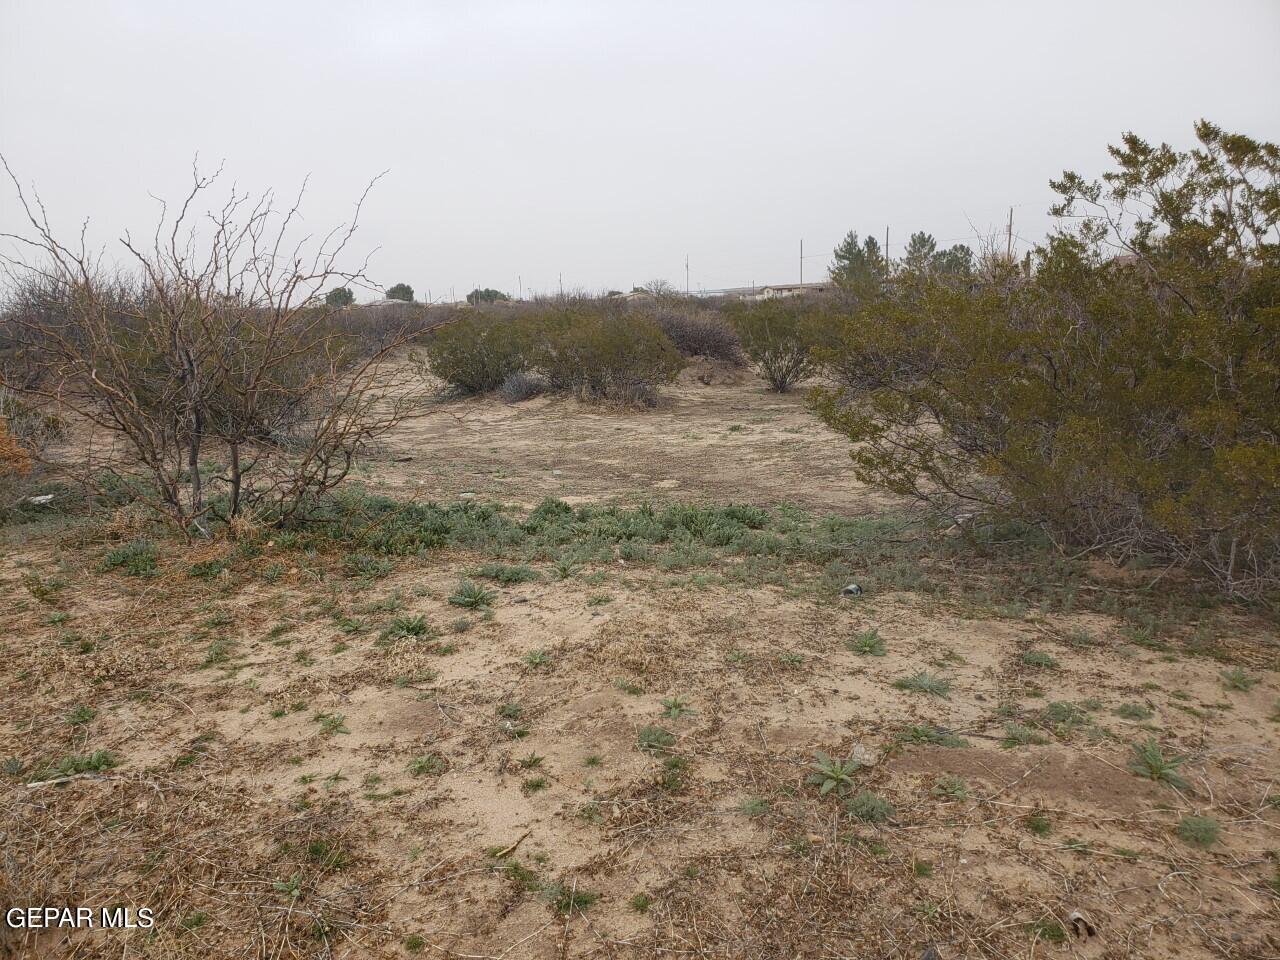 a view of a dry yard with trees